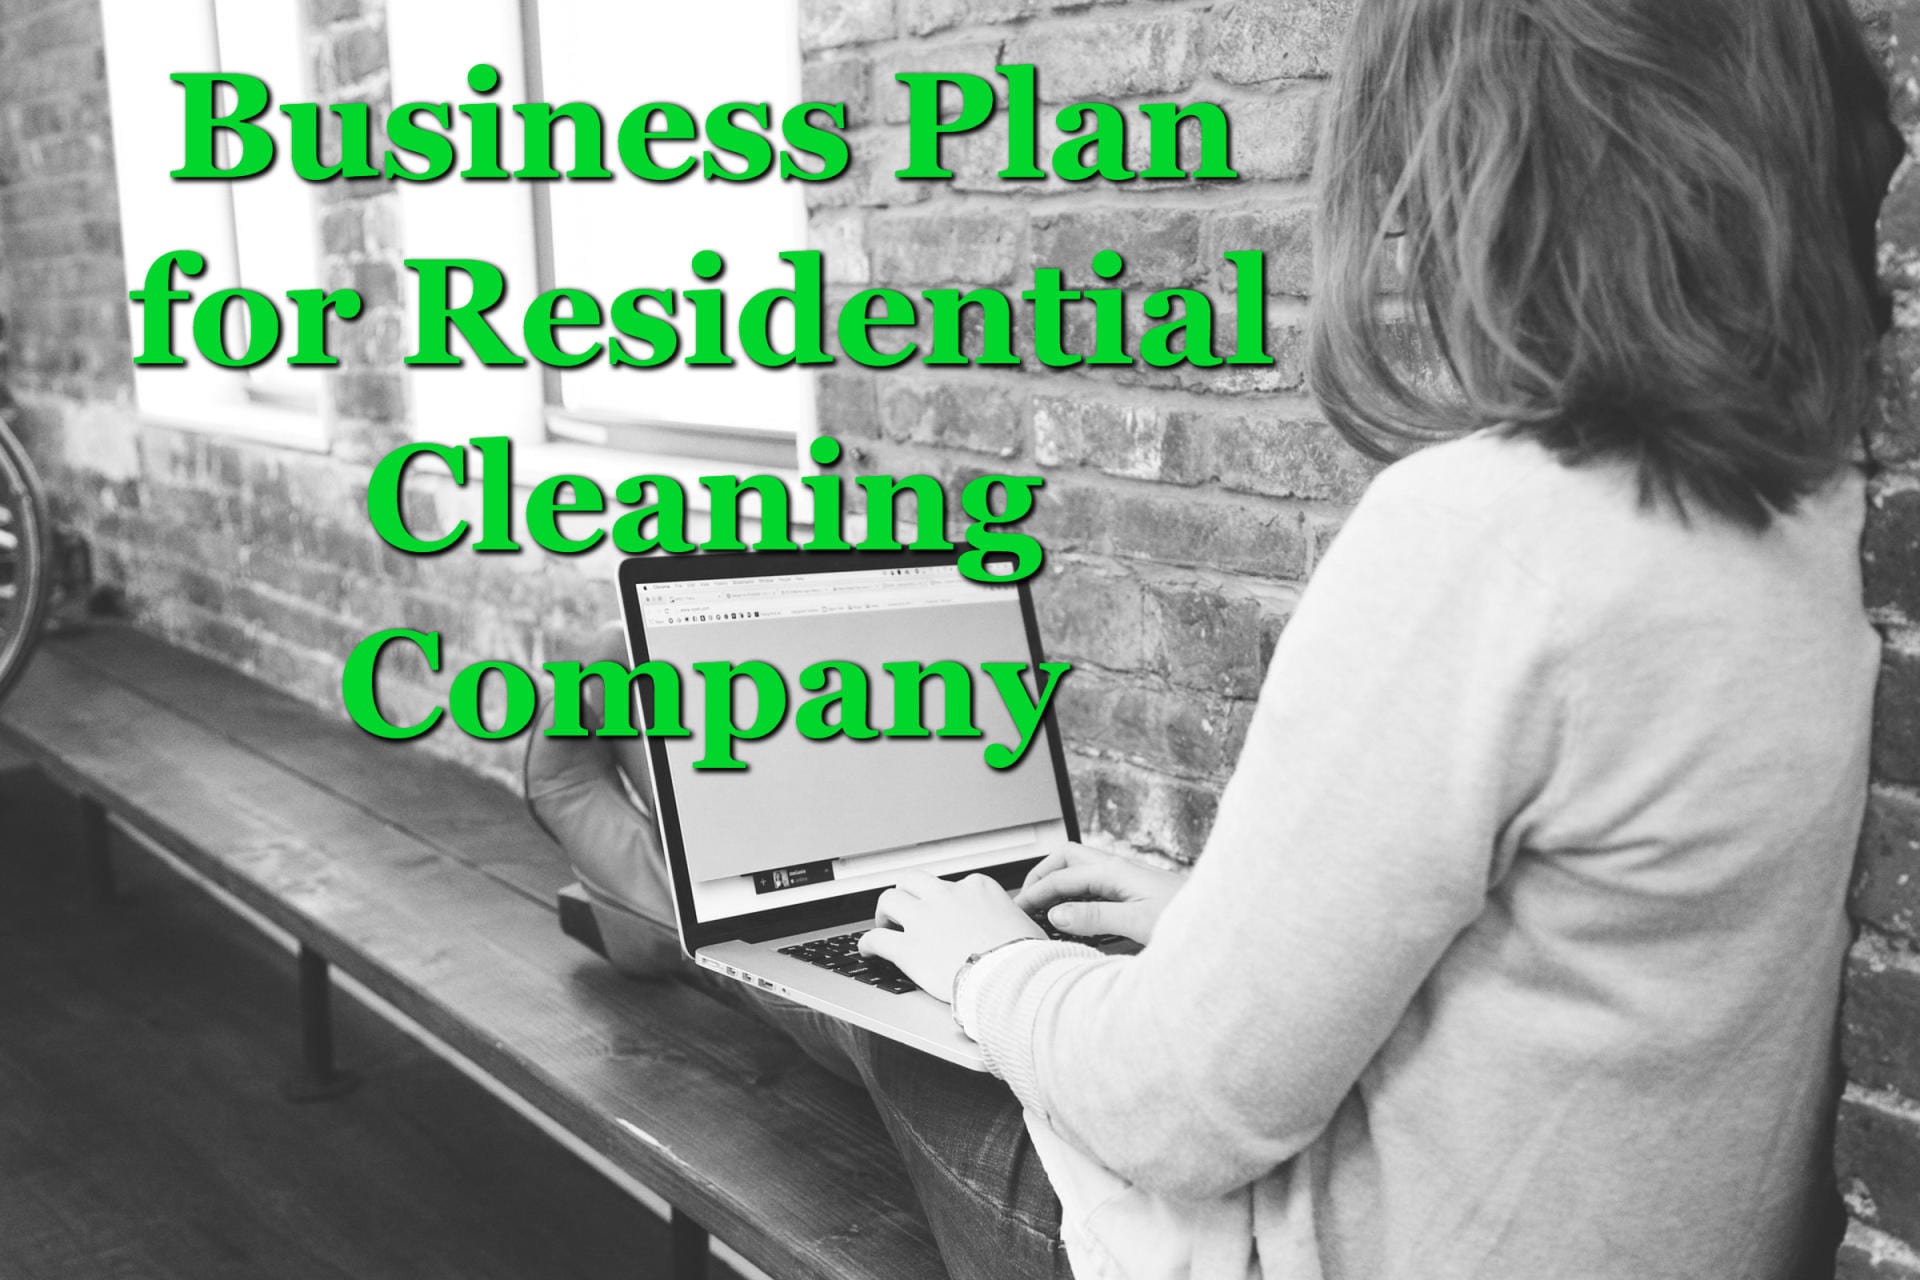 Business Plan for Residential Cleaning Company